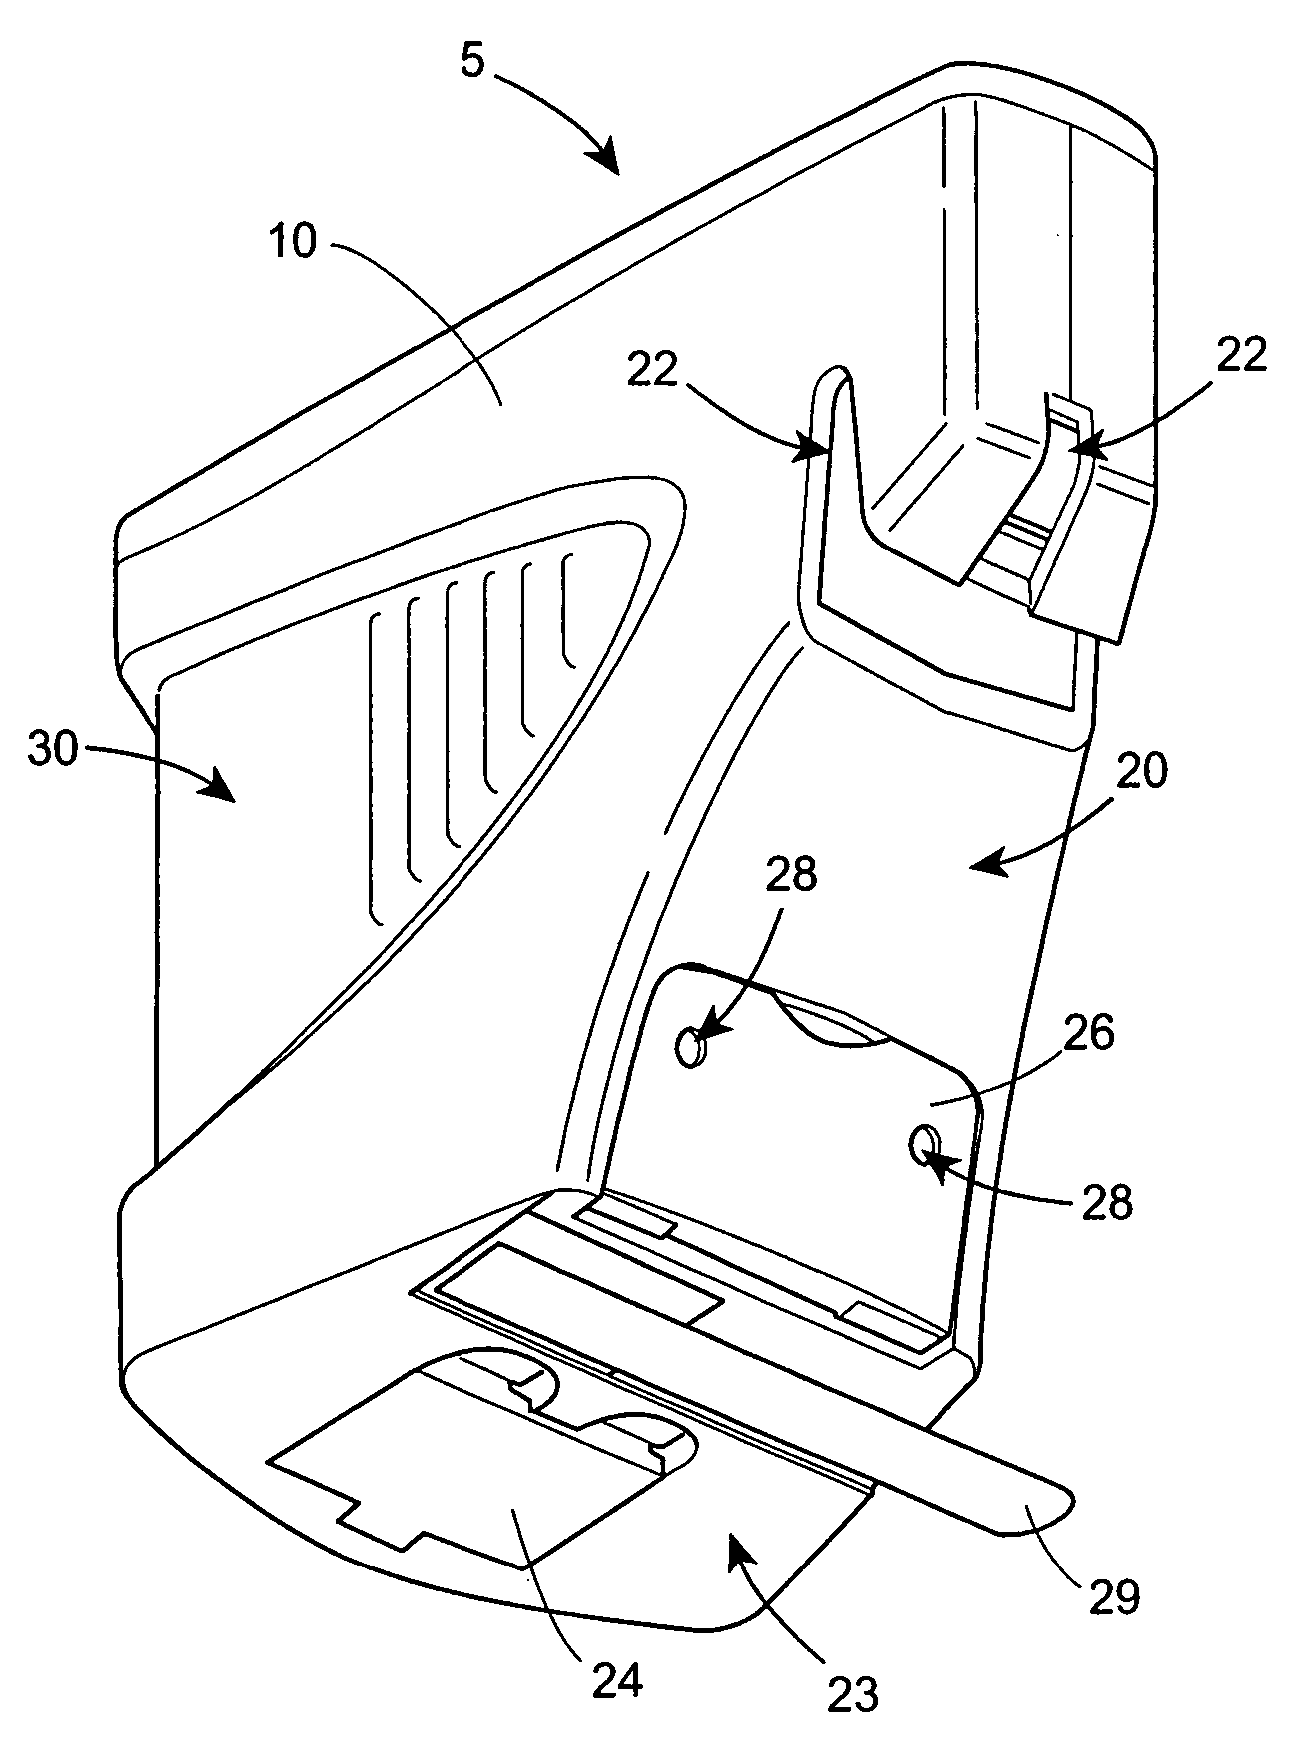 Intersecting laser line generating device